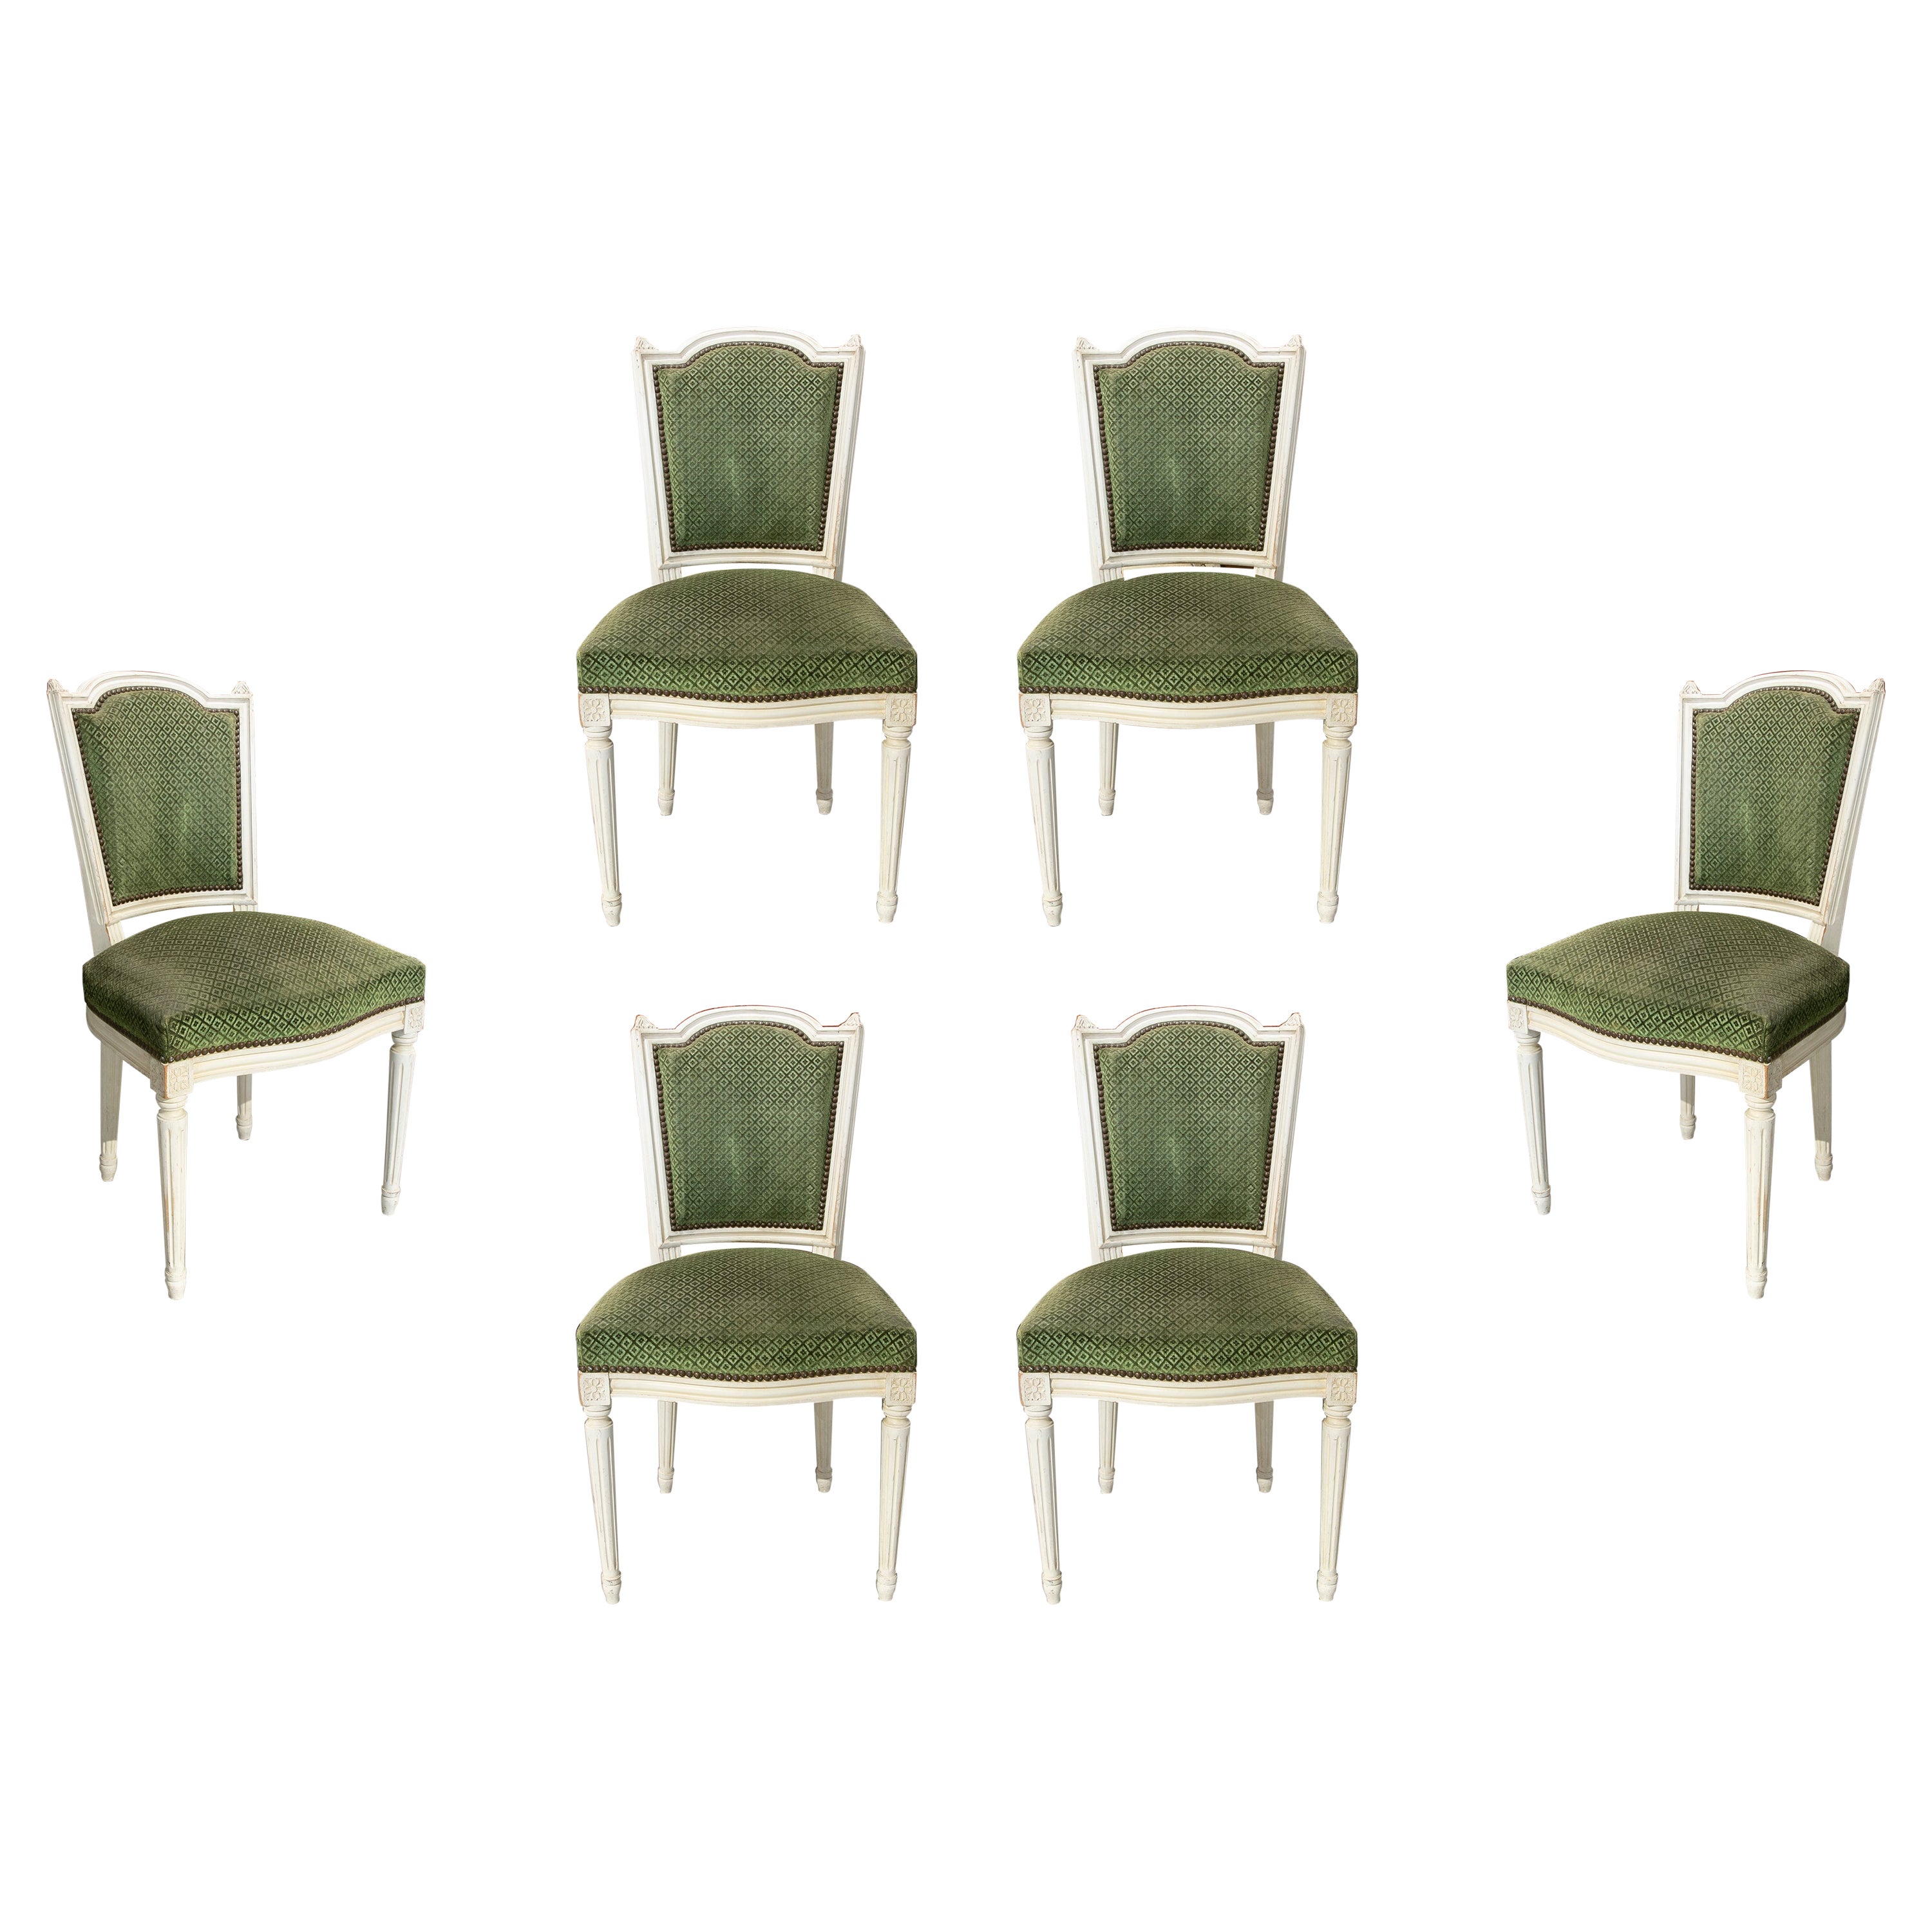 19th Century, French, Set of Six Wooden Chairs Upholstered in Green For Sale